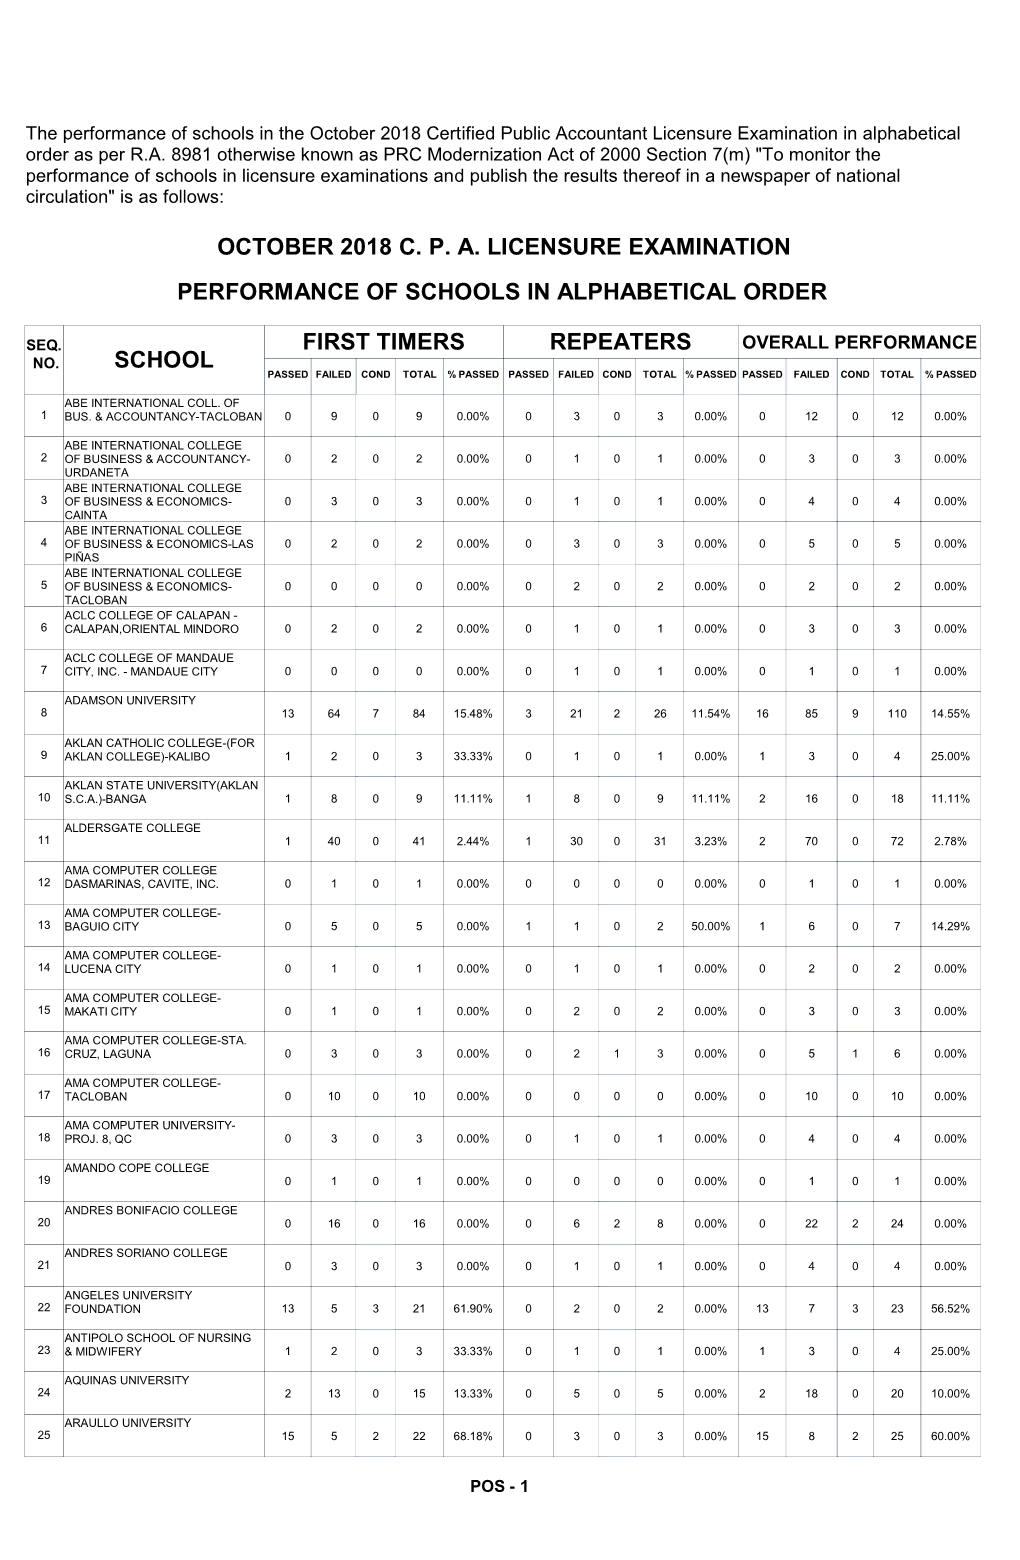 The Performance of Schools in the October 2018 Certified Public Accountant Licensure Examination in Alphabetical Order As Per R.A